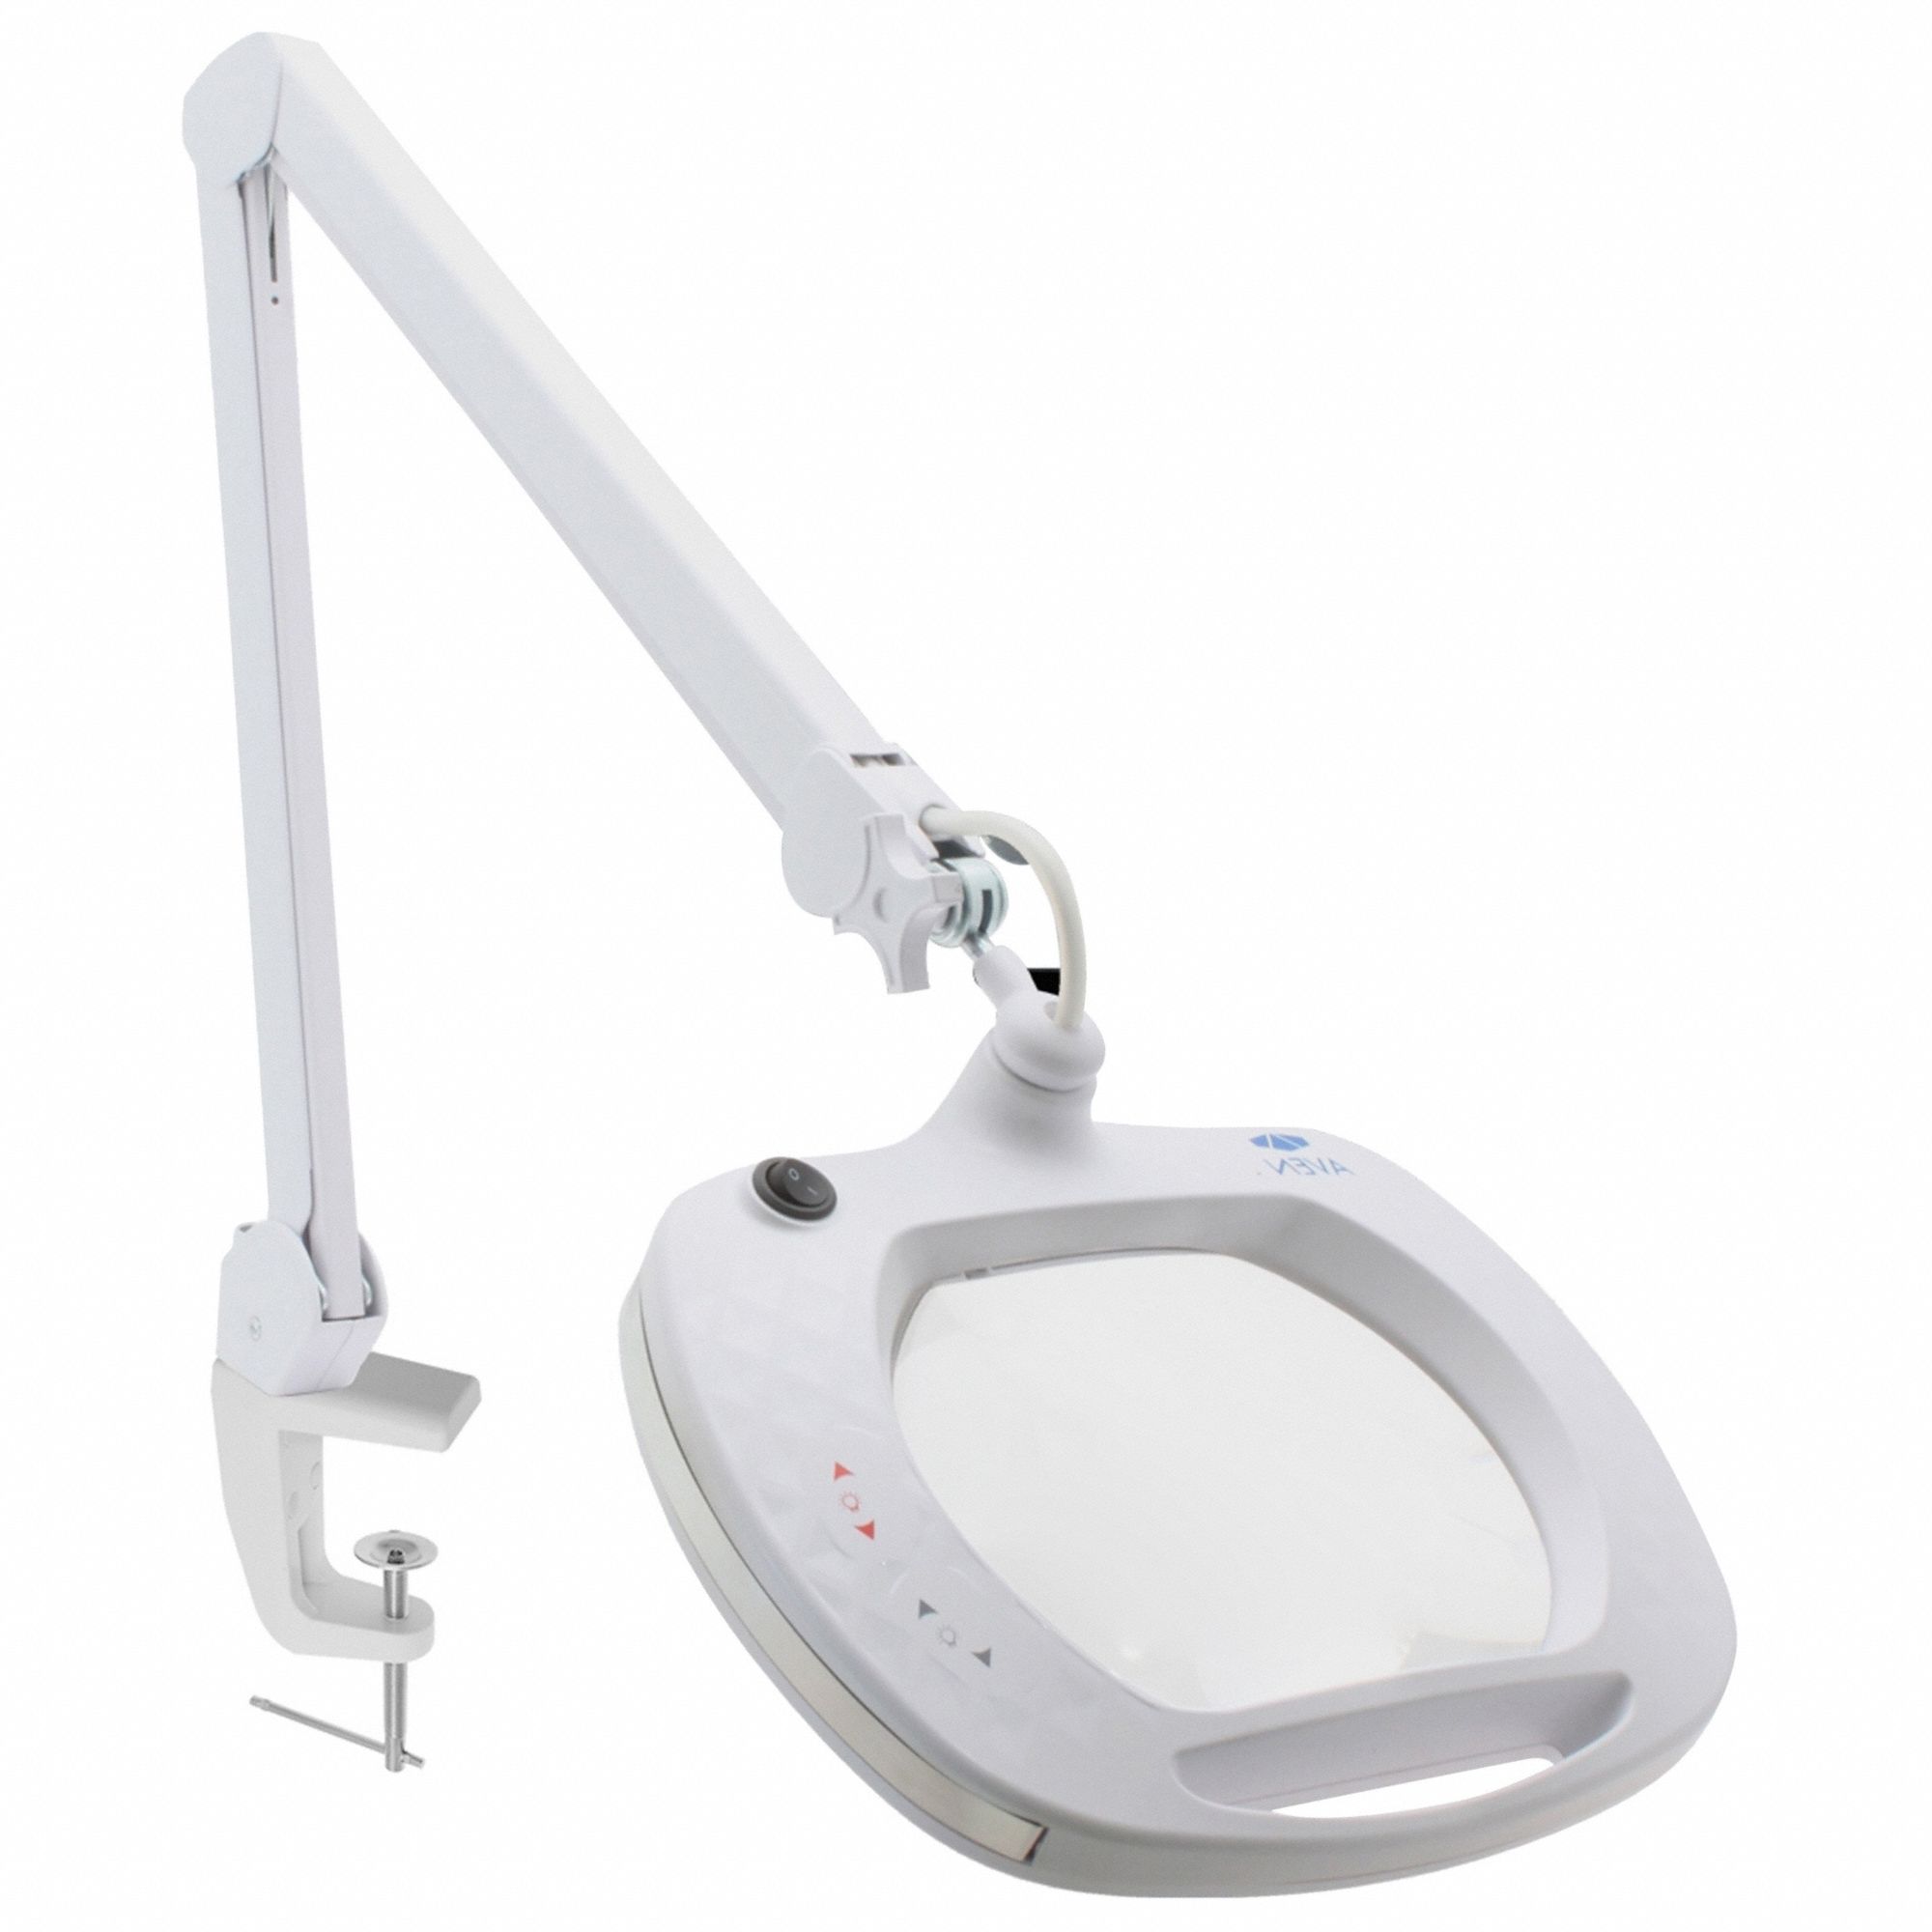 Prolite® Economy Fluorescent Magnifier - 3 Diopter (1.75x) - 36 Reach -  Table Edge Clamp - EM-36-B - O.C. White Co.